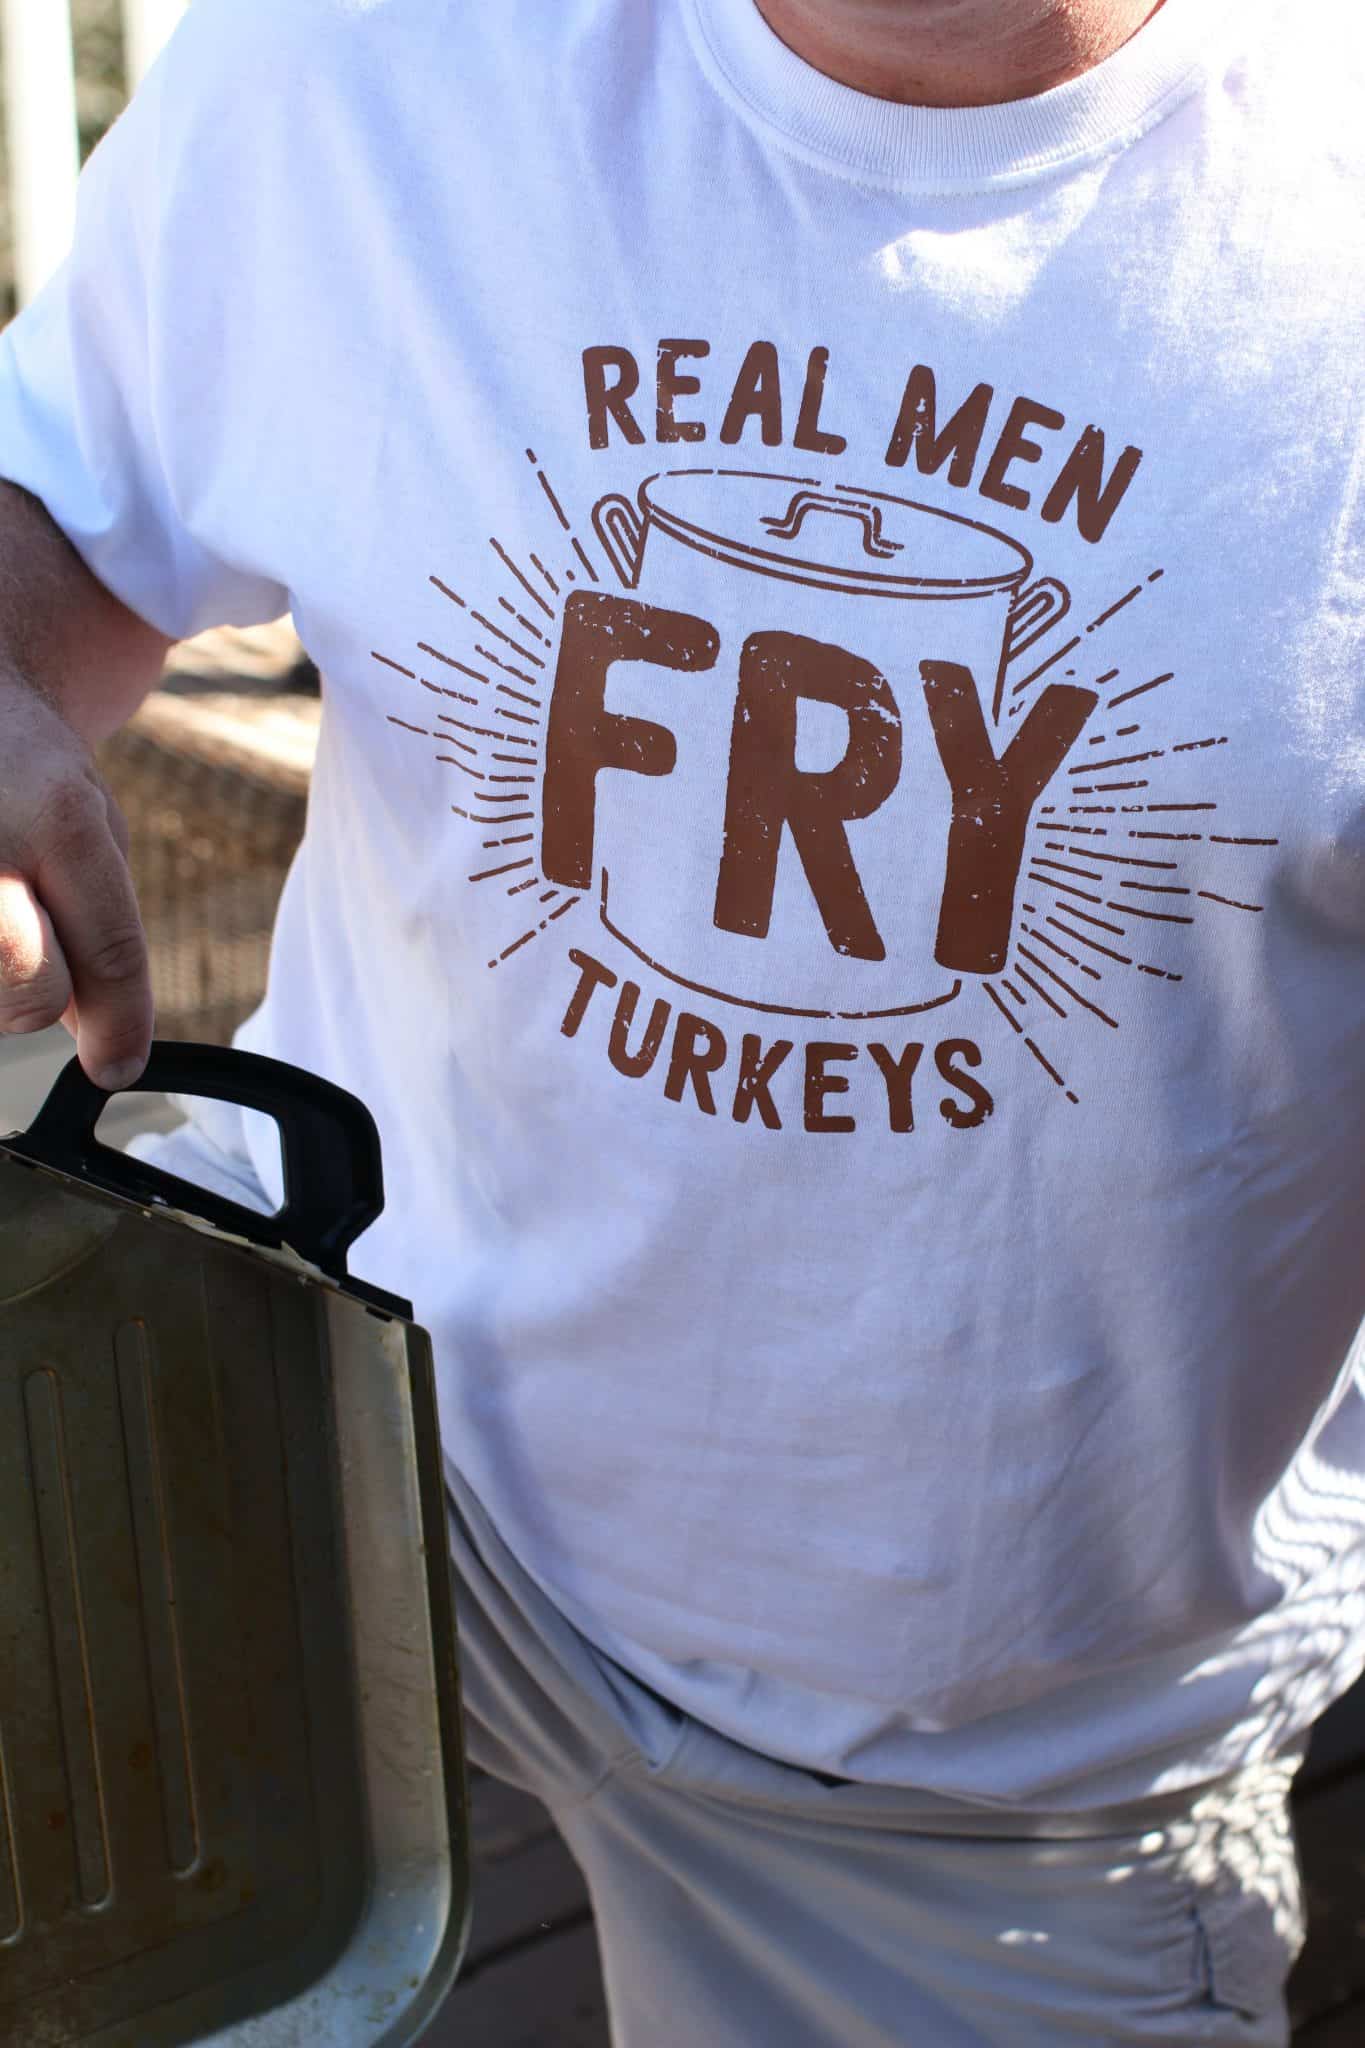 photo of a man wearing a t-shirt that says "Real Men Fry Turkeys".